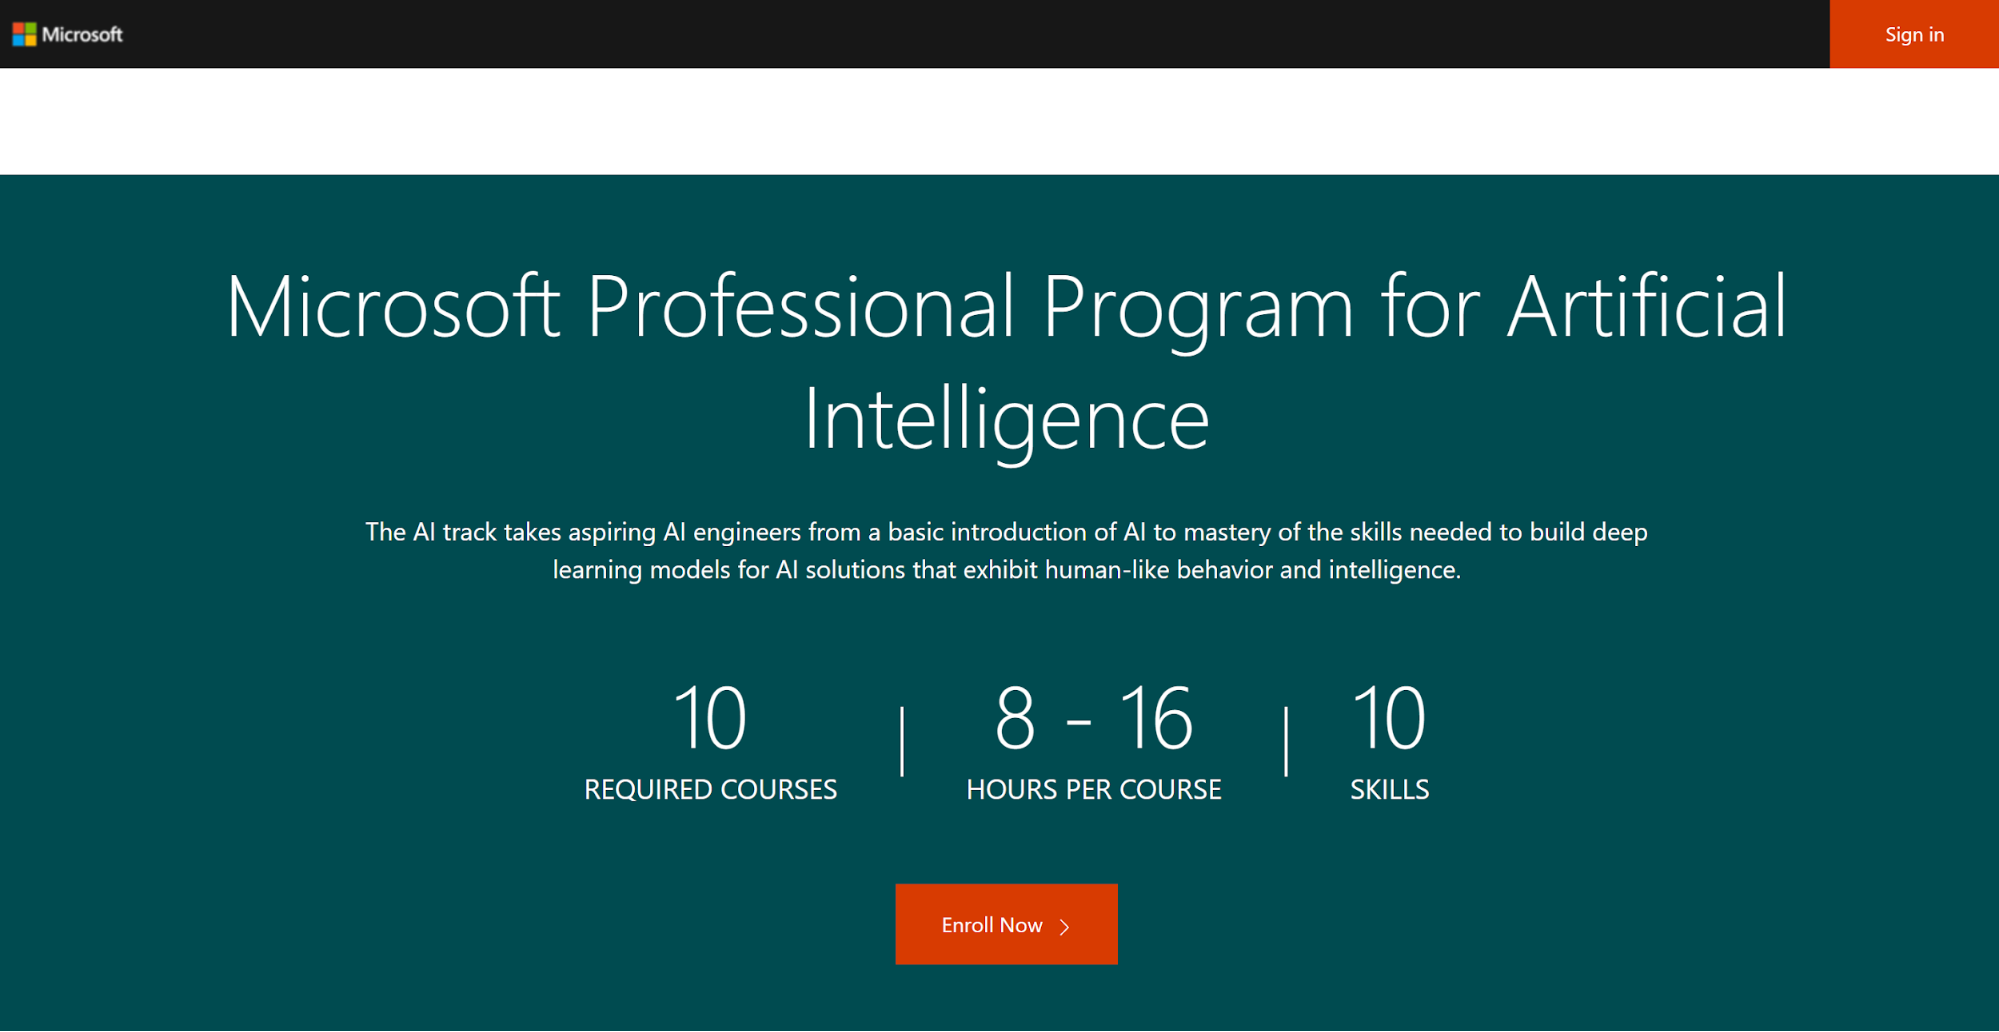 Microsoft’s AI training course materials are second to none and offer a credible brand’s backing to the qualification you get at the end.